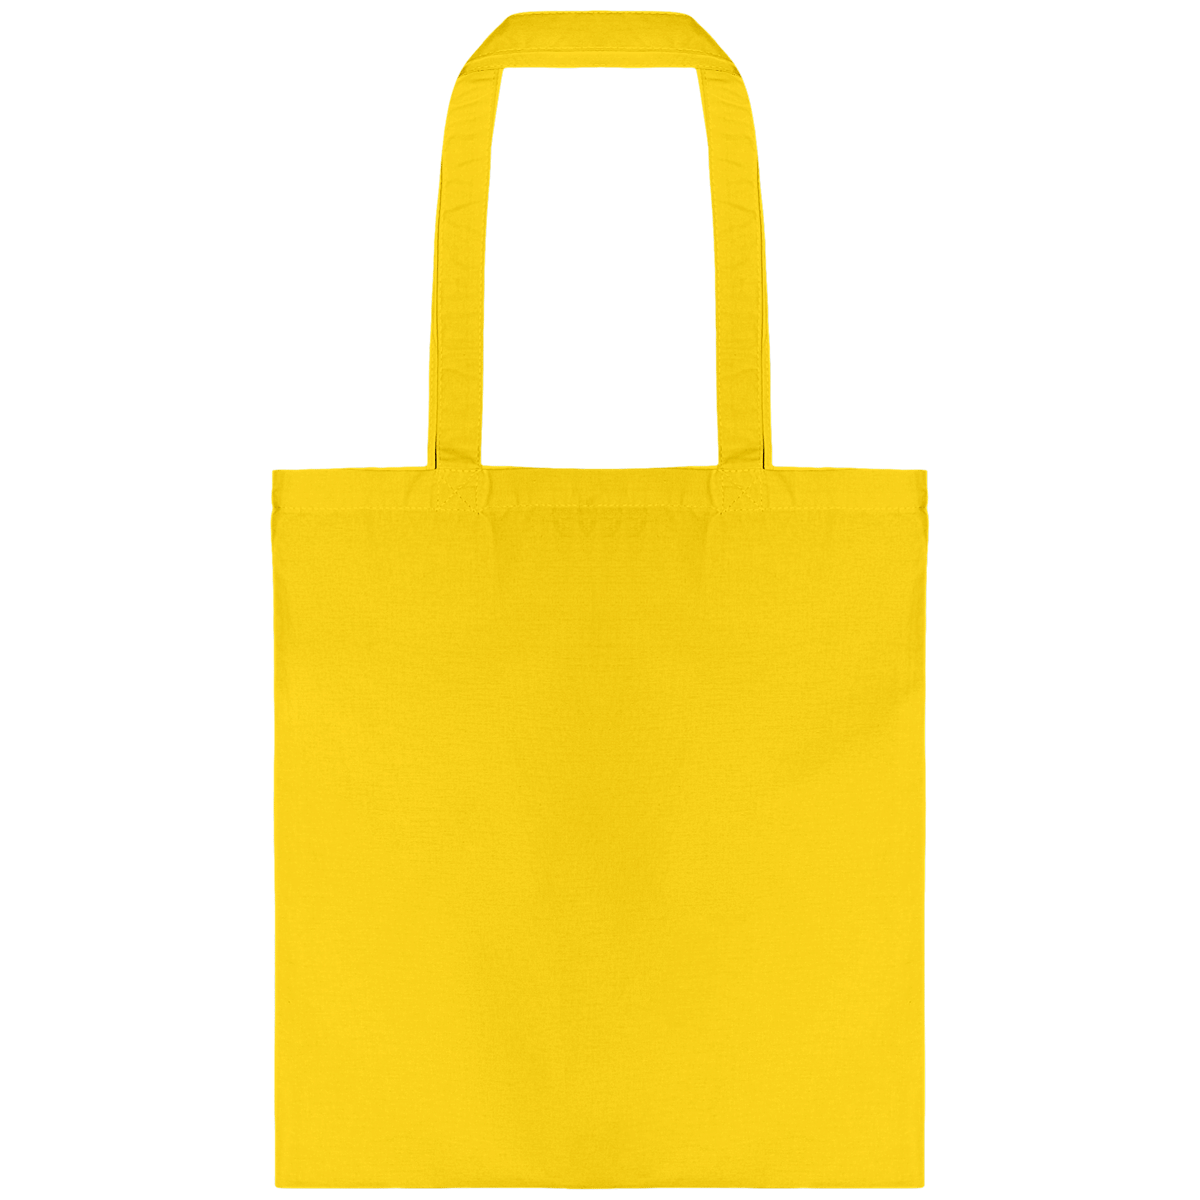 Personalise Your Tote Bag With Tunetoo Yellow